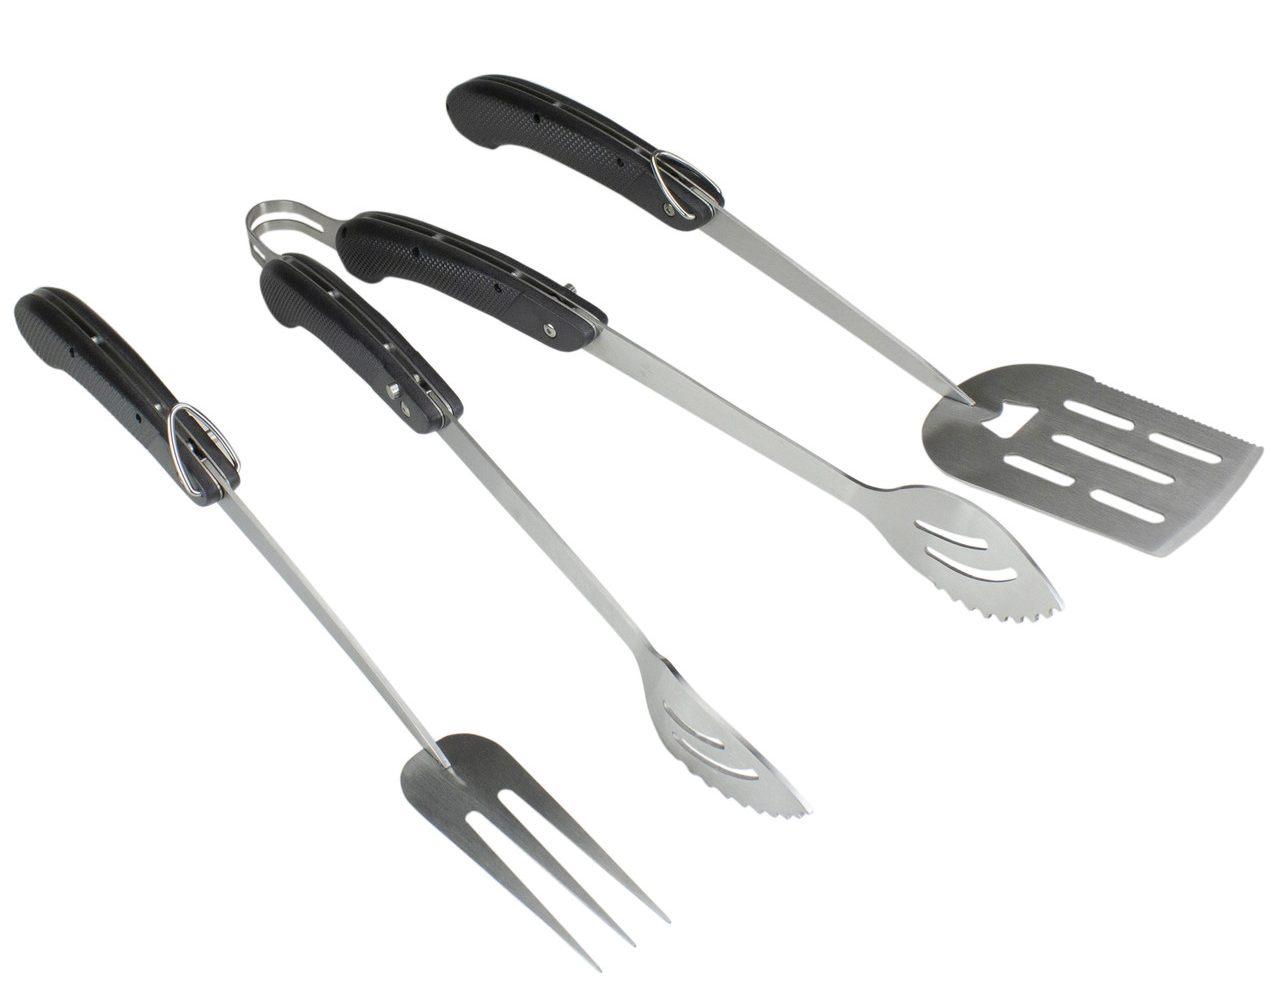 set of three black and silver barbecue tools